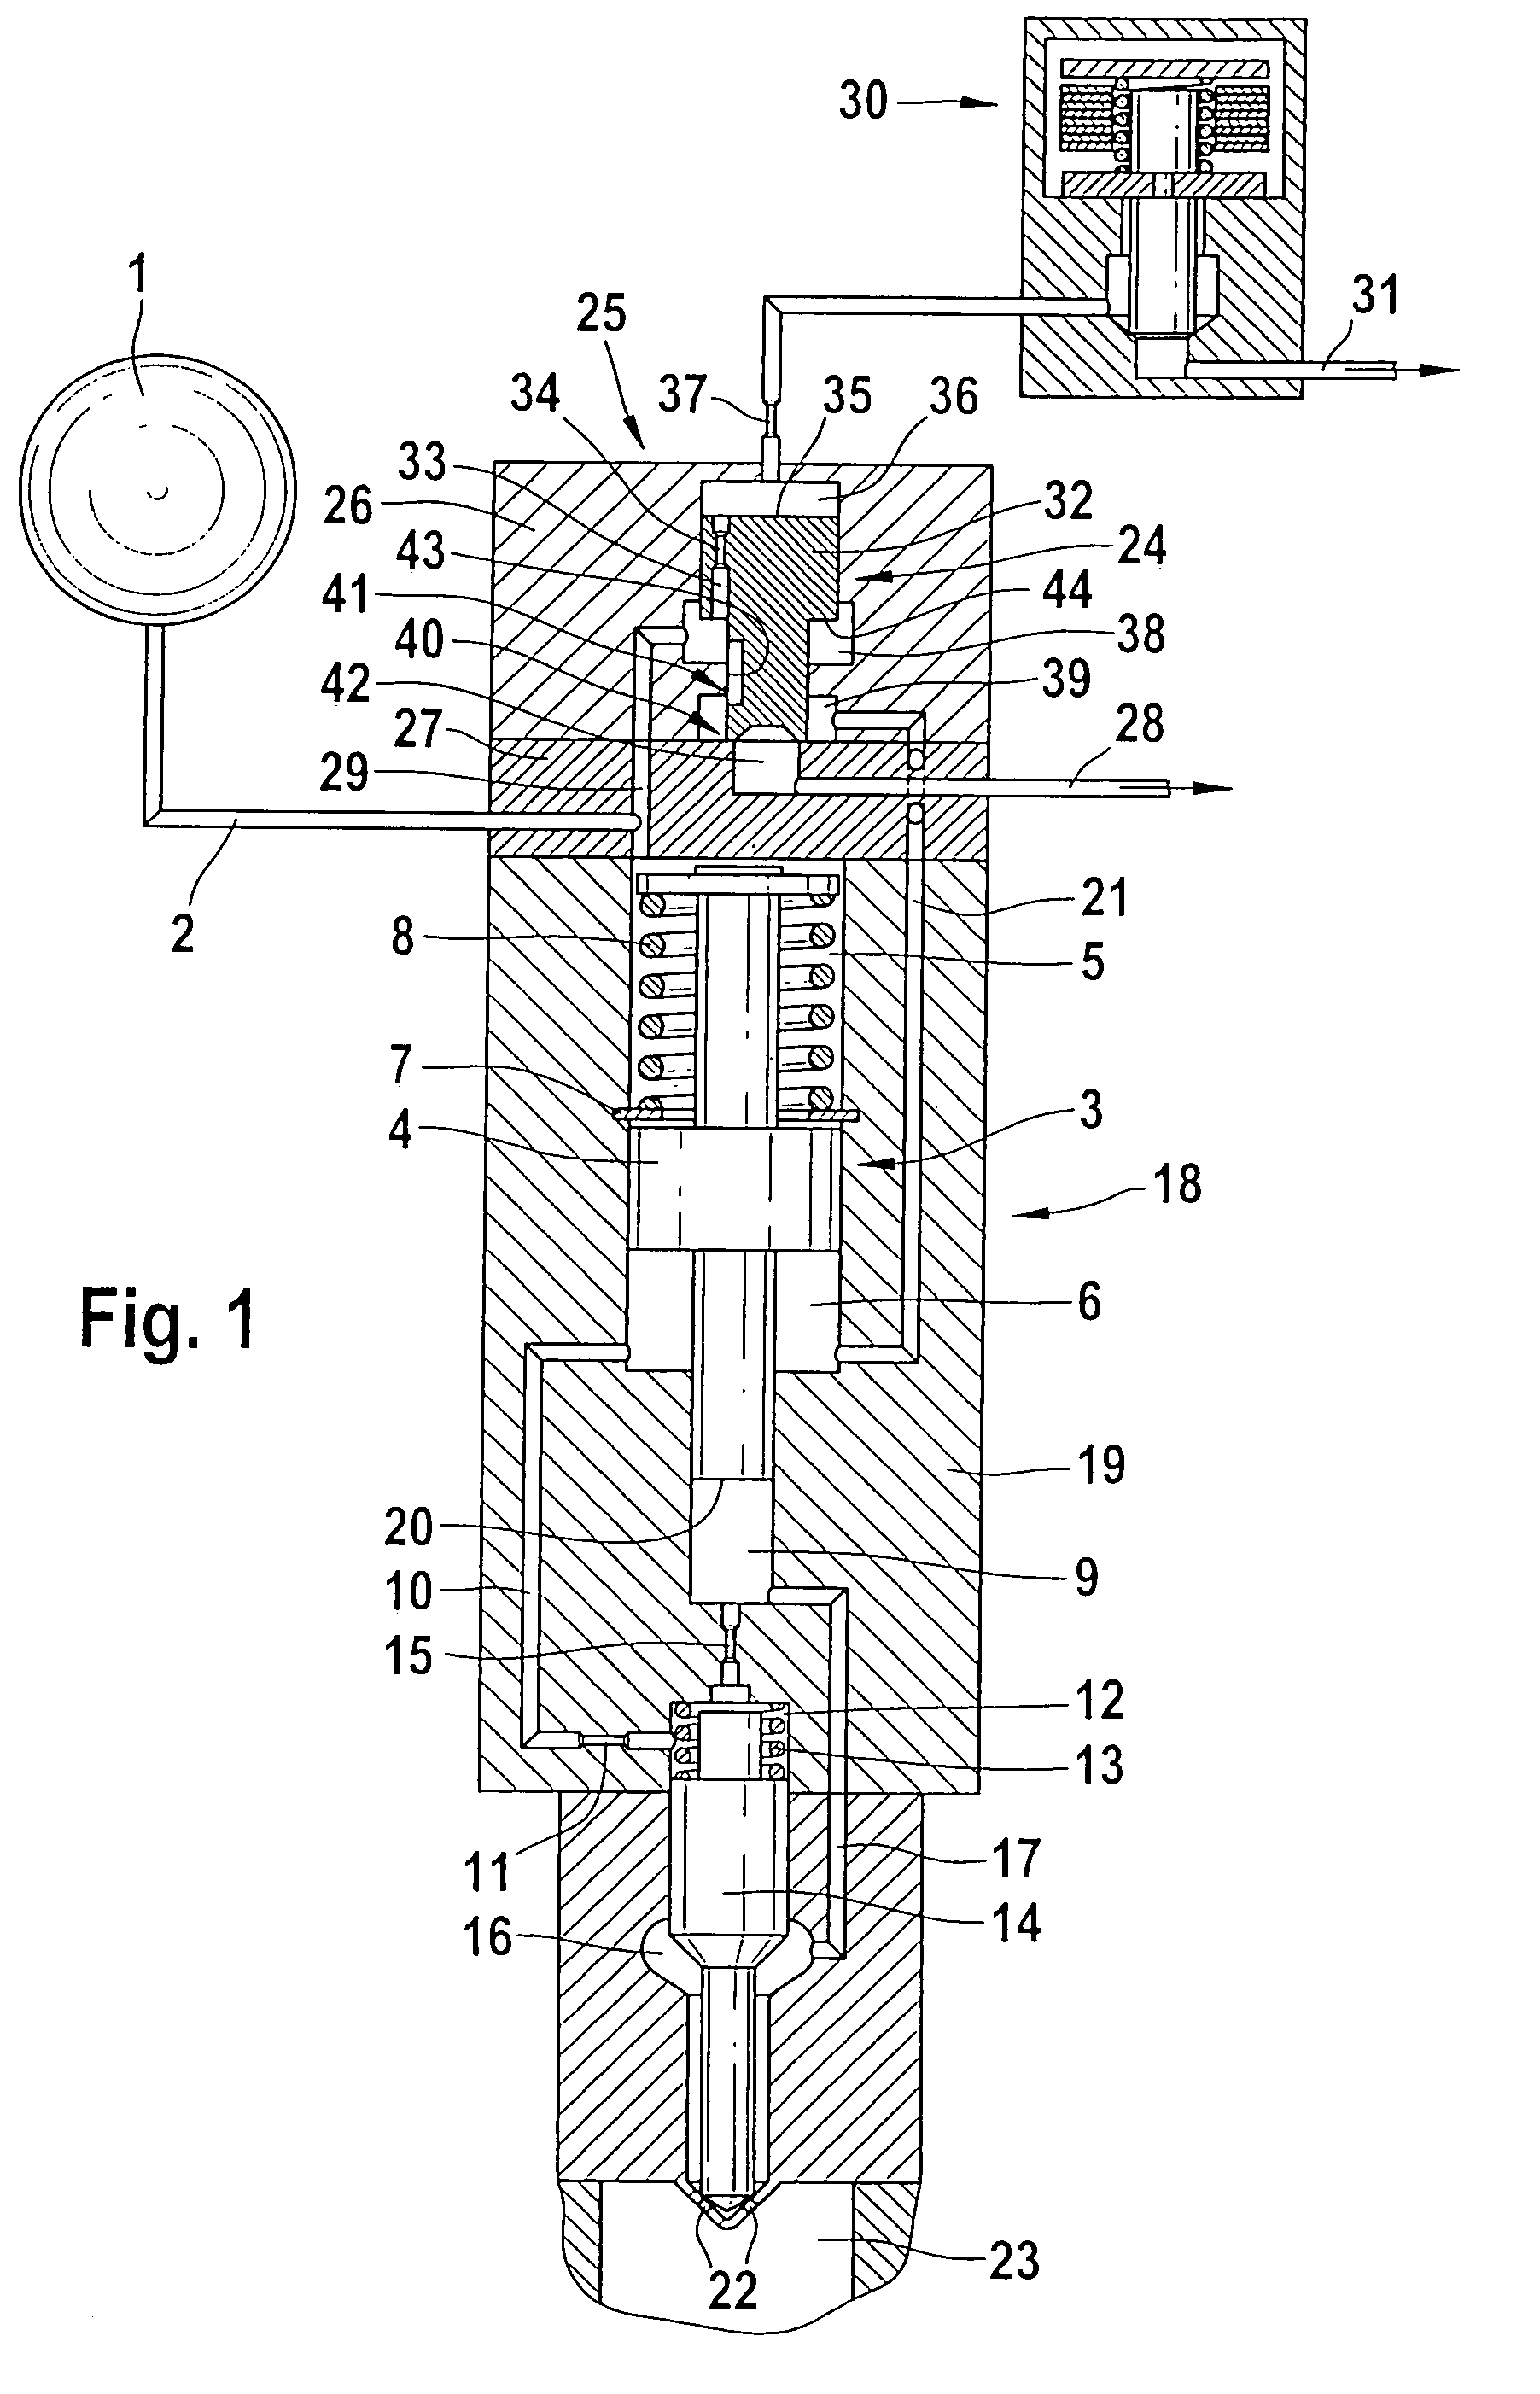 Fuel injector provided with provided with a pressure transmitter controlled by a servo valve